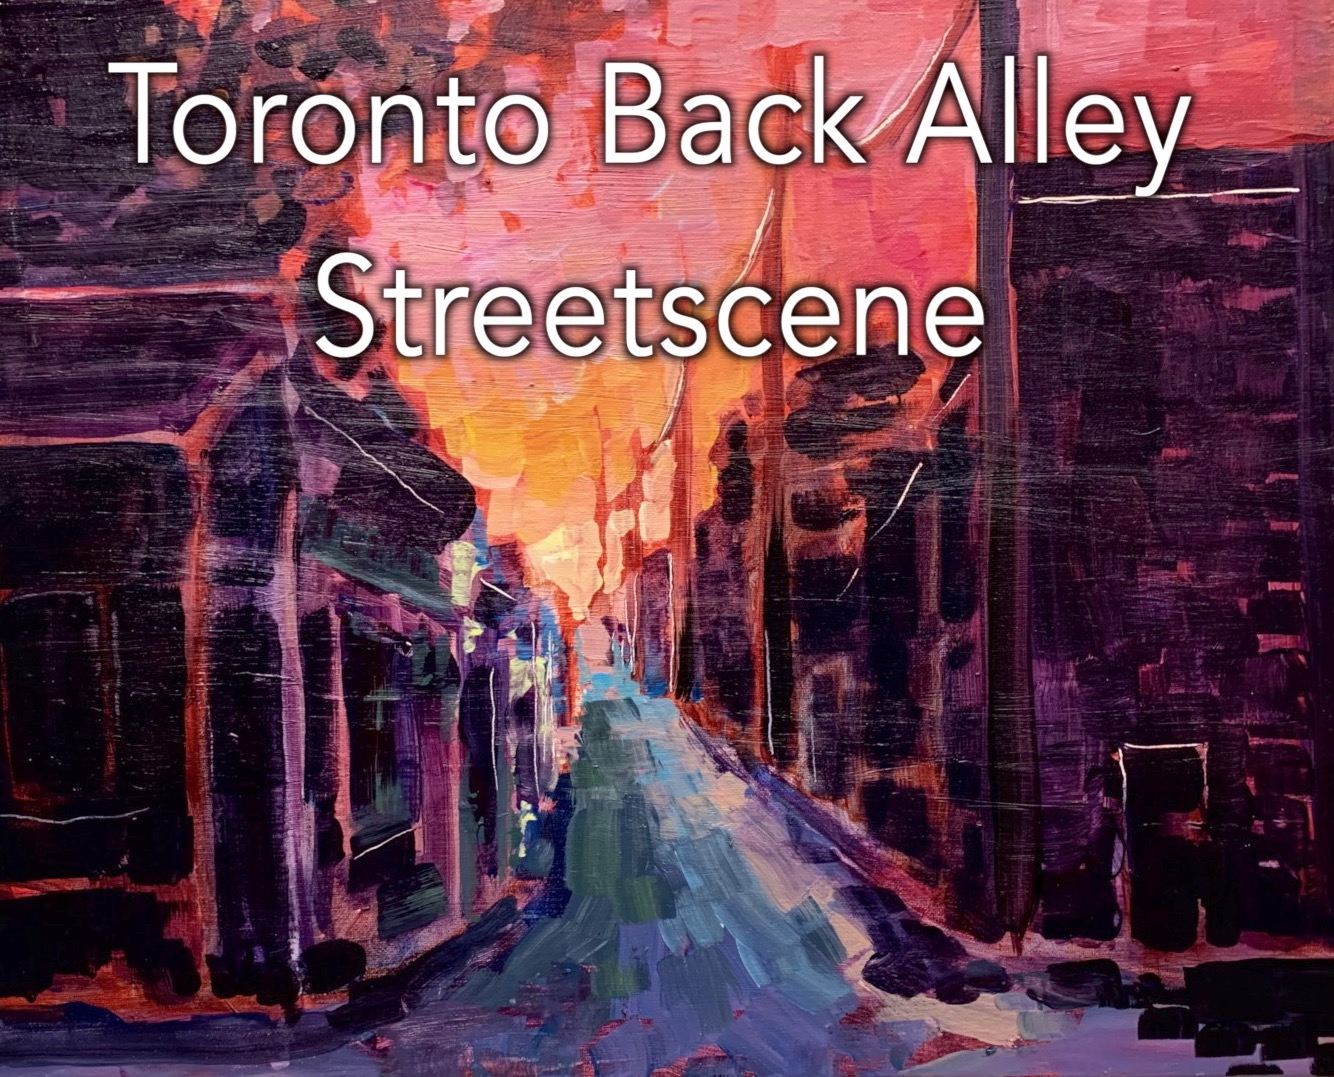 A Toronto Back Alley Street Scene experience project by Yaymaker